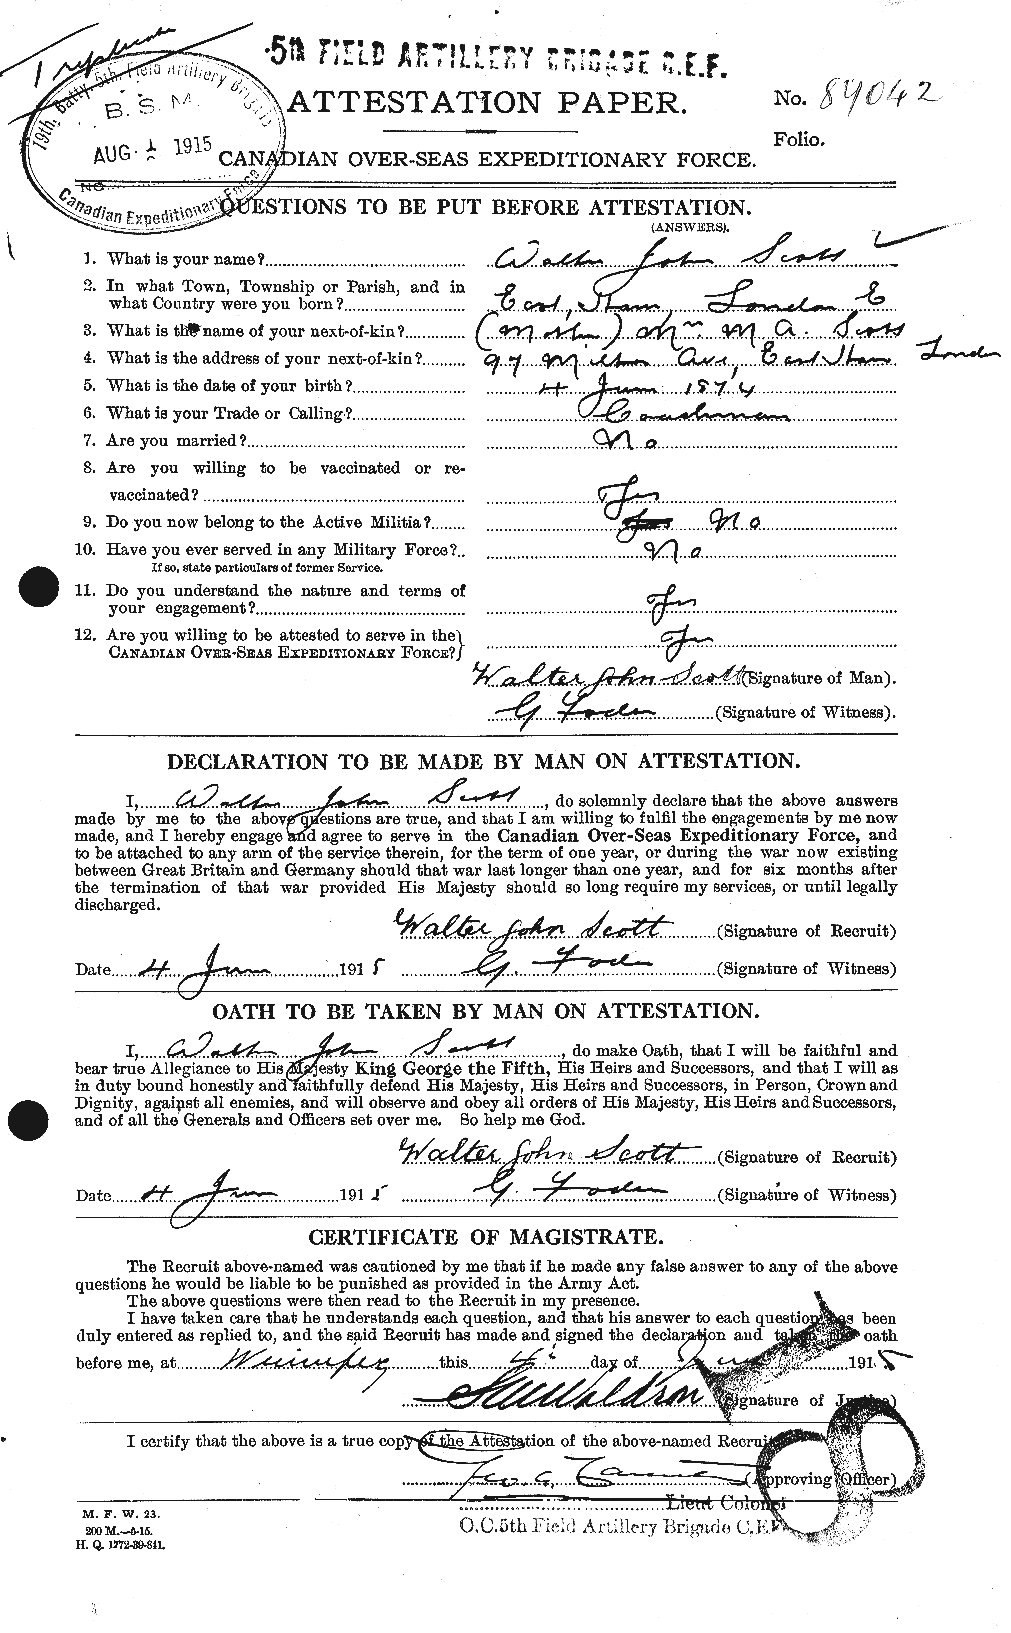 Personnel Records of the First World War - CEF 087973a